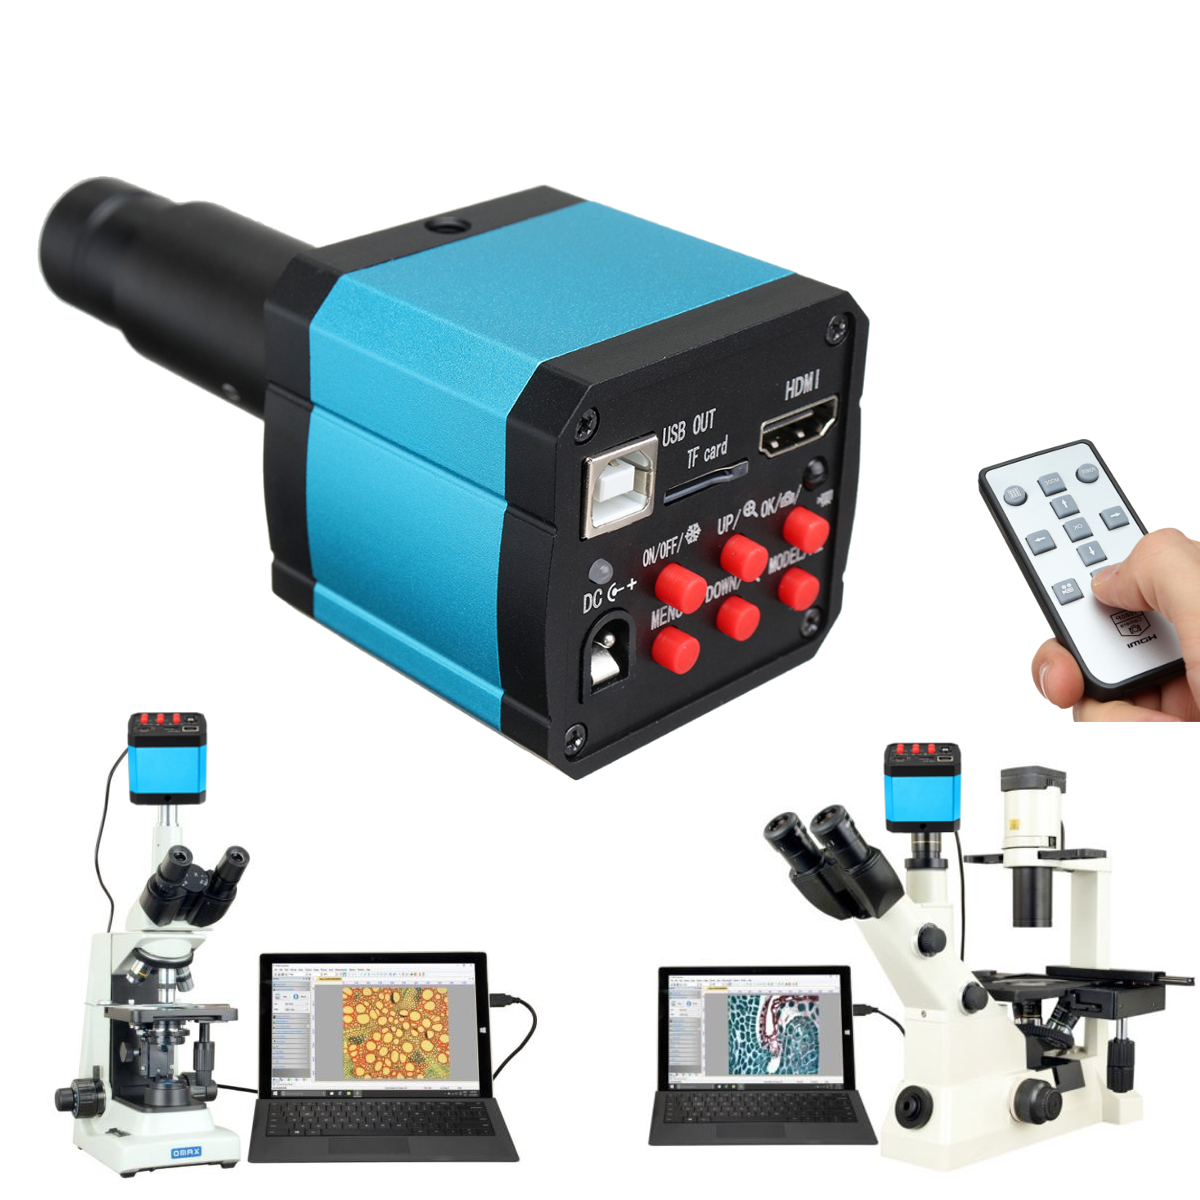 HAYEAR-16MP-1080P-60FPS-USB-C-mount-Digital-Industry-Video-Microscope-Camera-with-HDMI-Cable-1416576-4